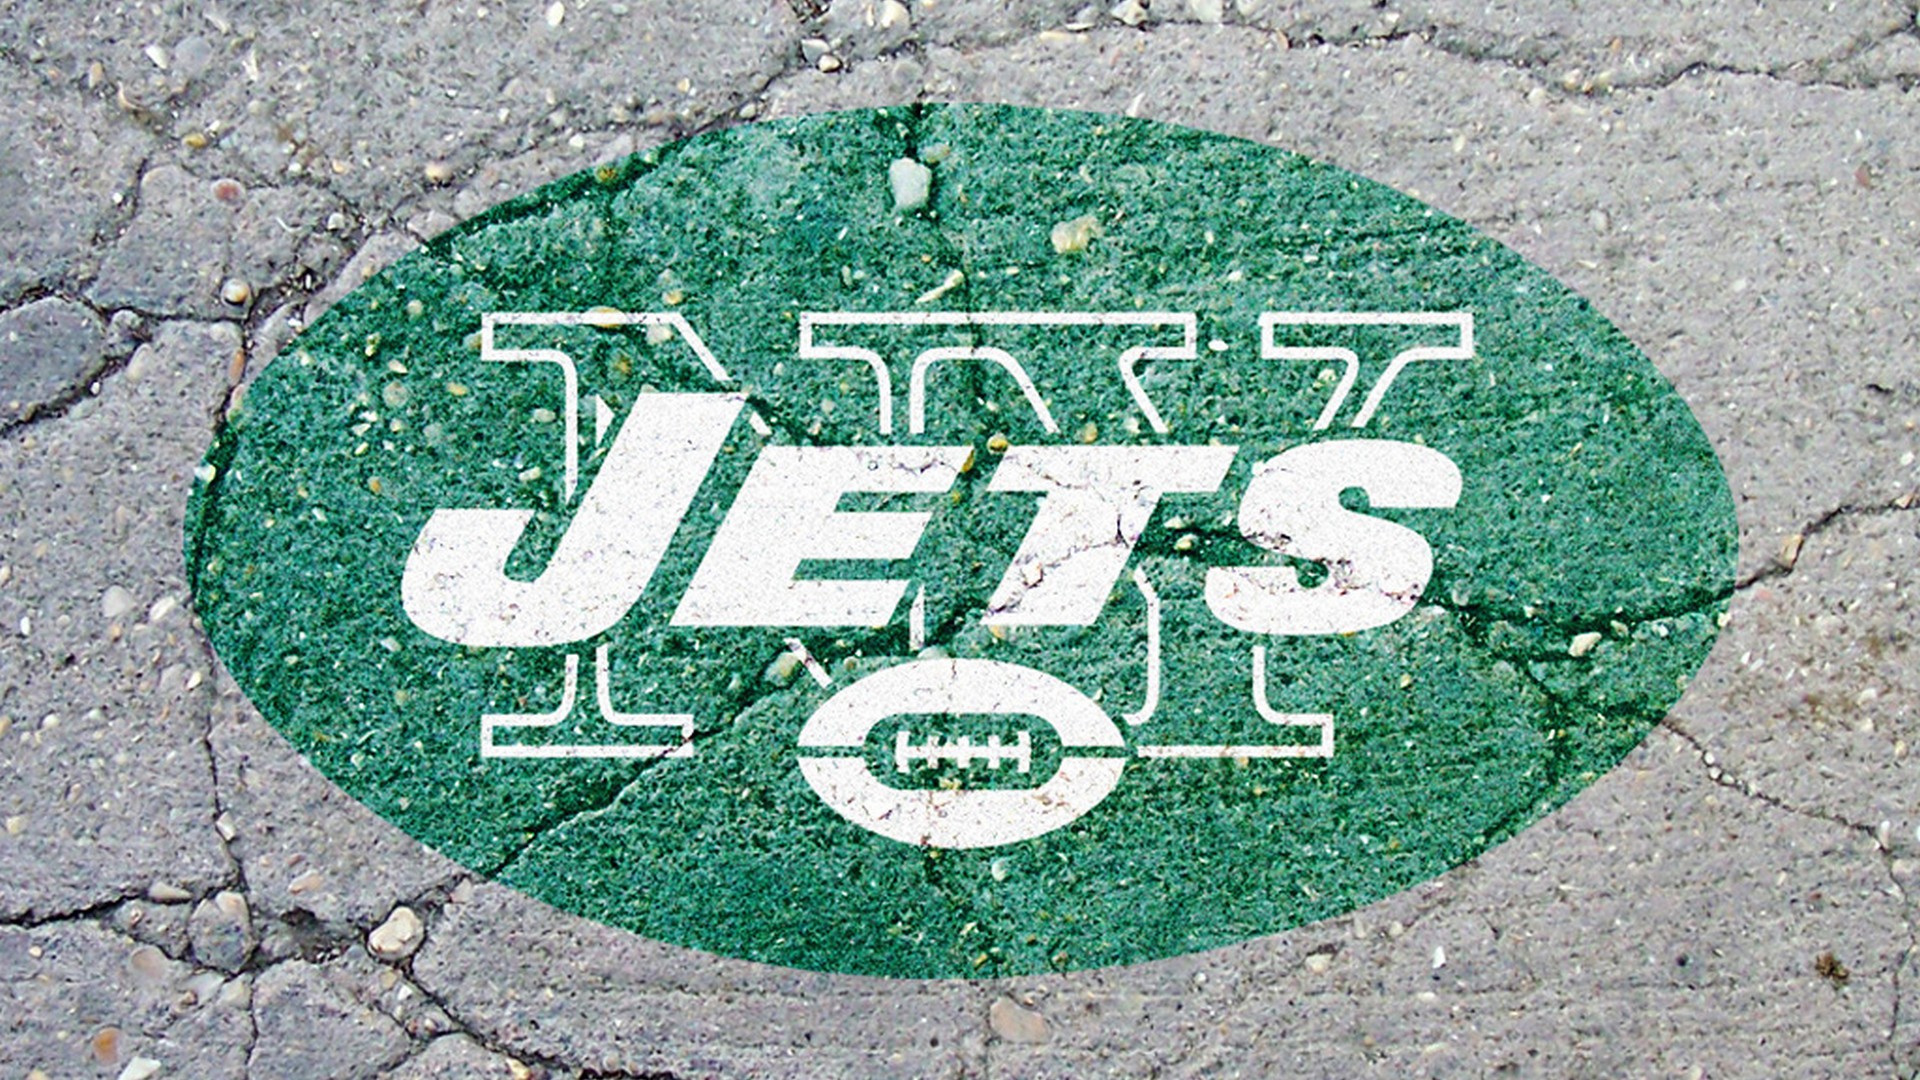 HD New York Jets Backgrounds with resolution 1920x1080 pixel. You can make this wallpaper for your Mac or Windows Desktop Background, iPhone, Android or Tablet and another Smartphone device